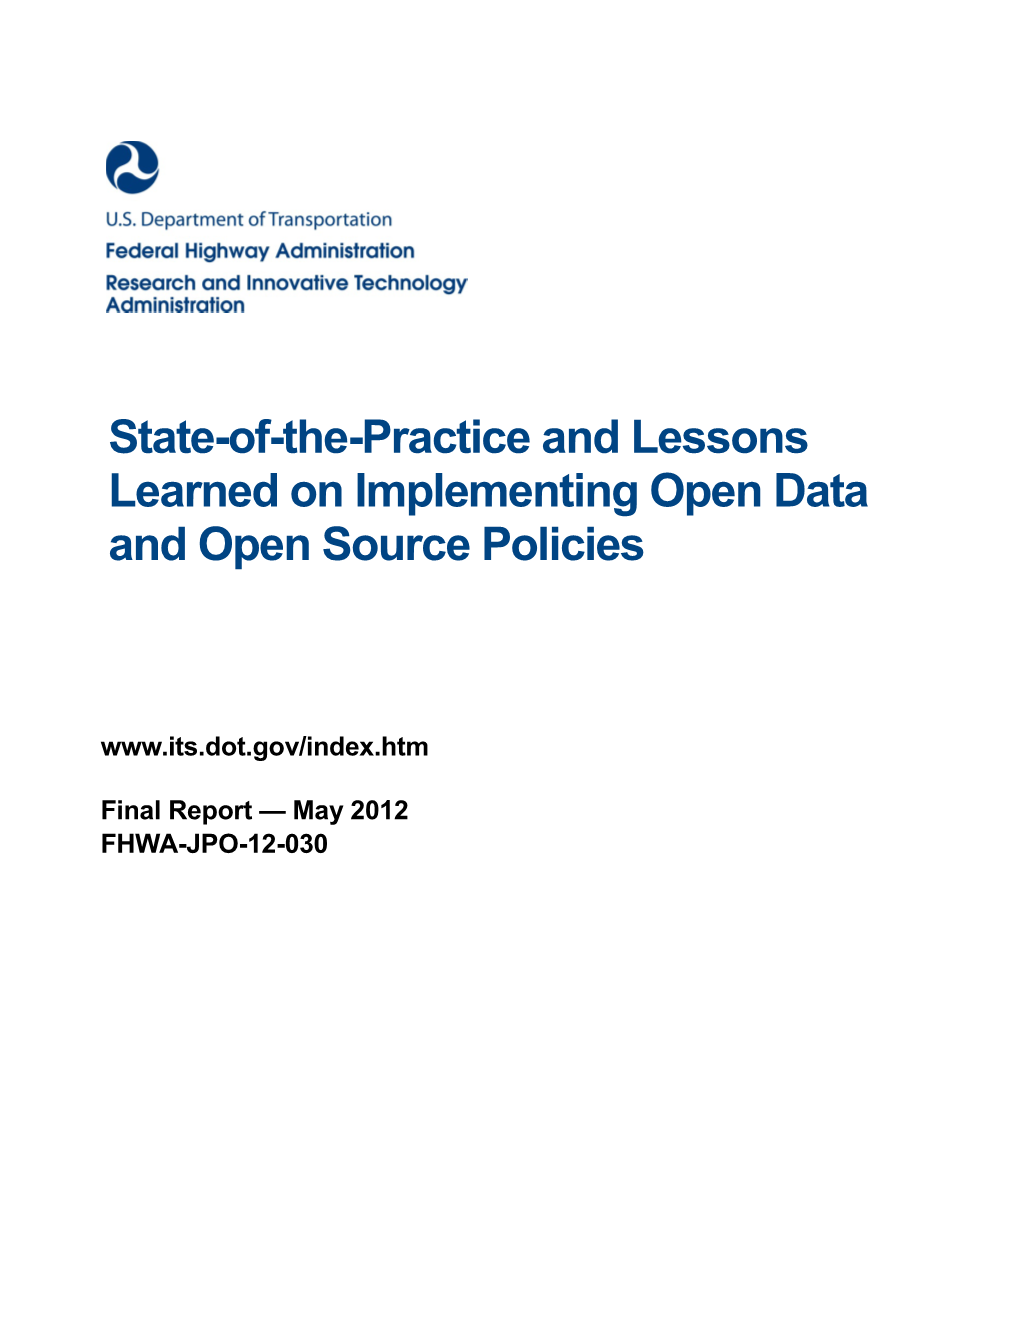 State-Of-The-Practice and Lessons Learned on Implementing Open Data and Open Source Policies